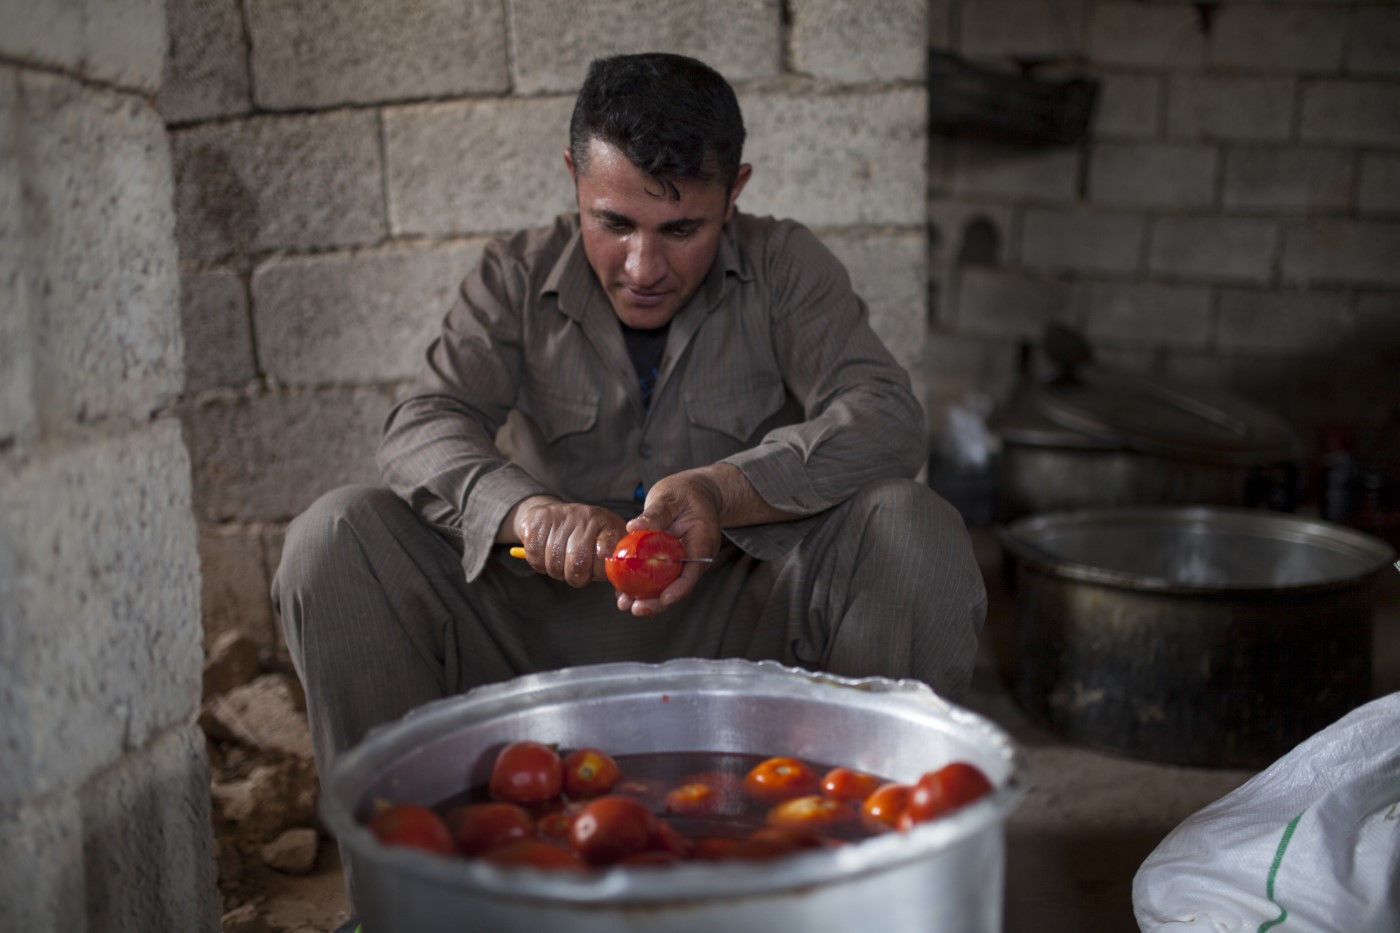 Peshmerga cooking dinner in one of the battalions of the front line located one kilometer from the Islamic State. Zarga, Tuzkhurmatu, Kurdistan, Iraq. August 11, 2017